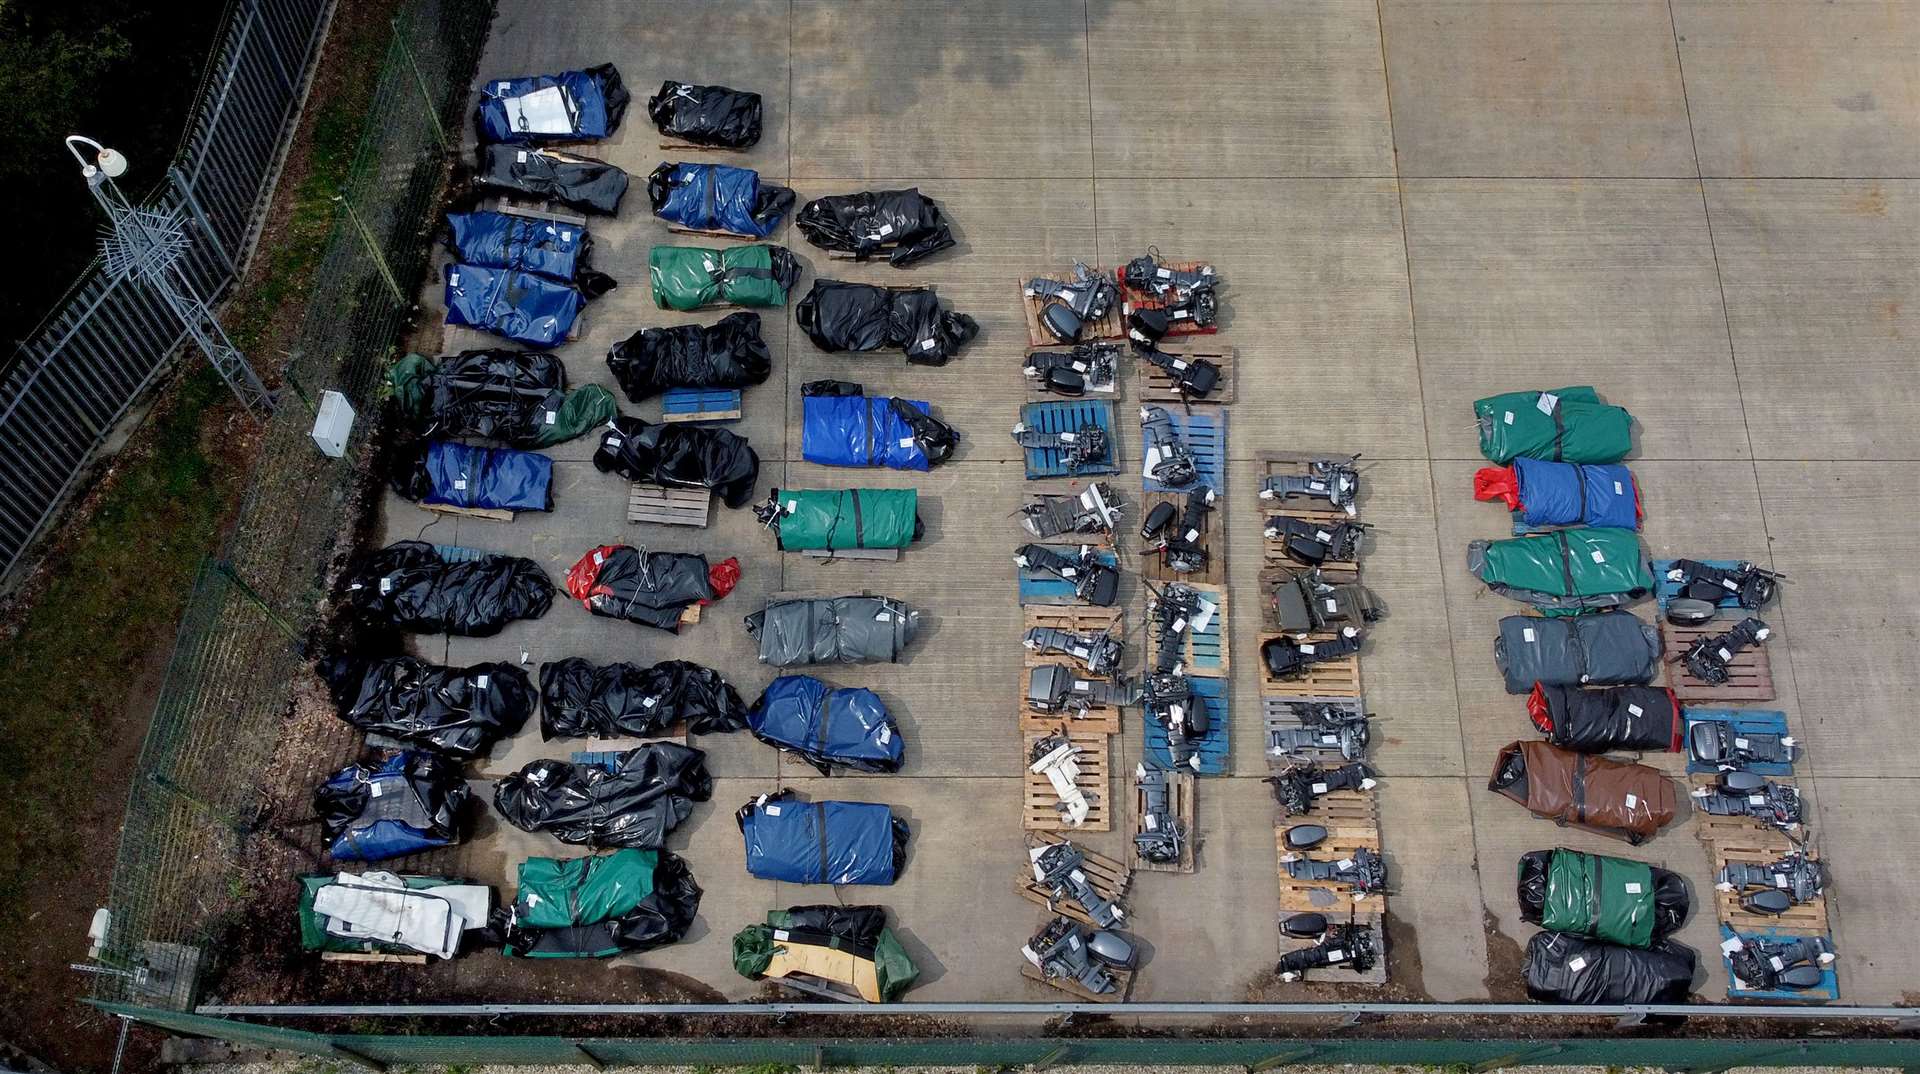 A view of small boats and engines used to cross the Channel by people thought to be migrants at a warehouse facility in Dover (PA)